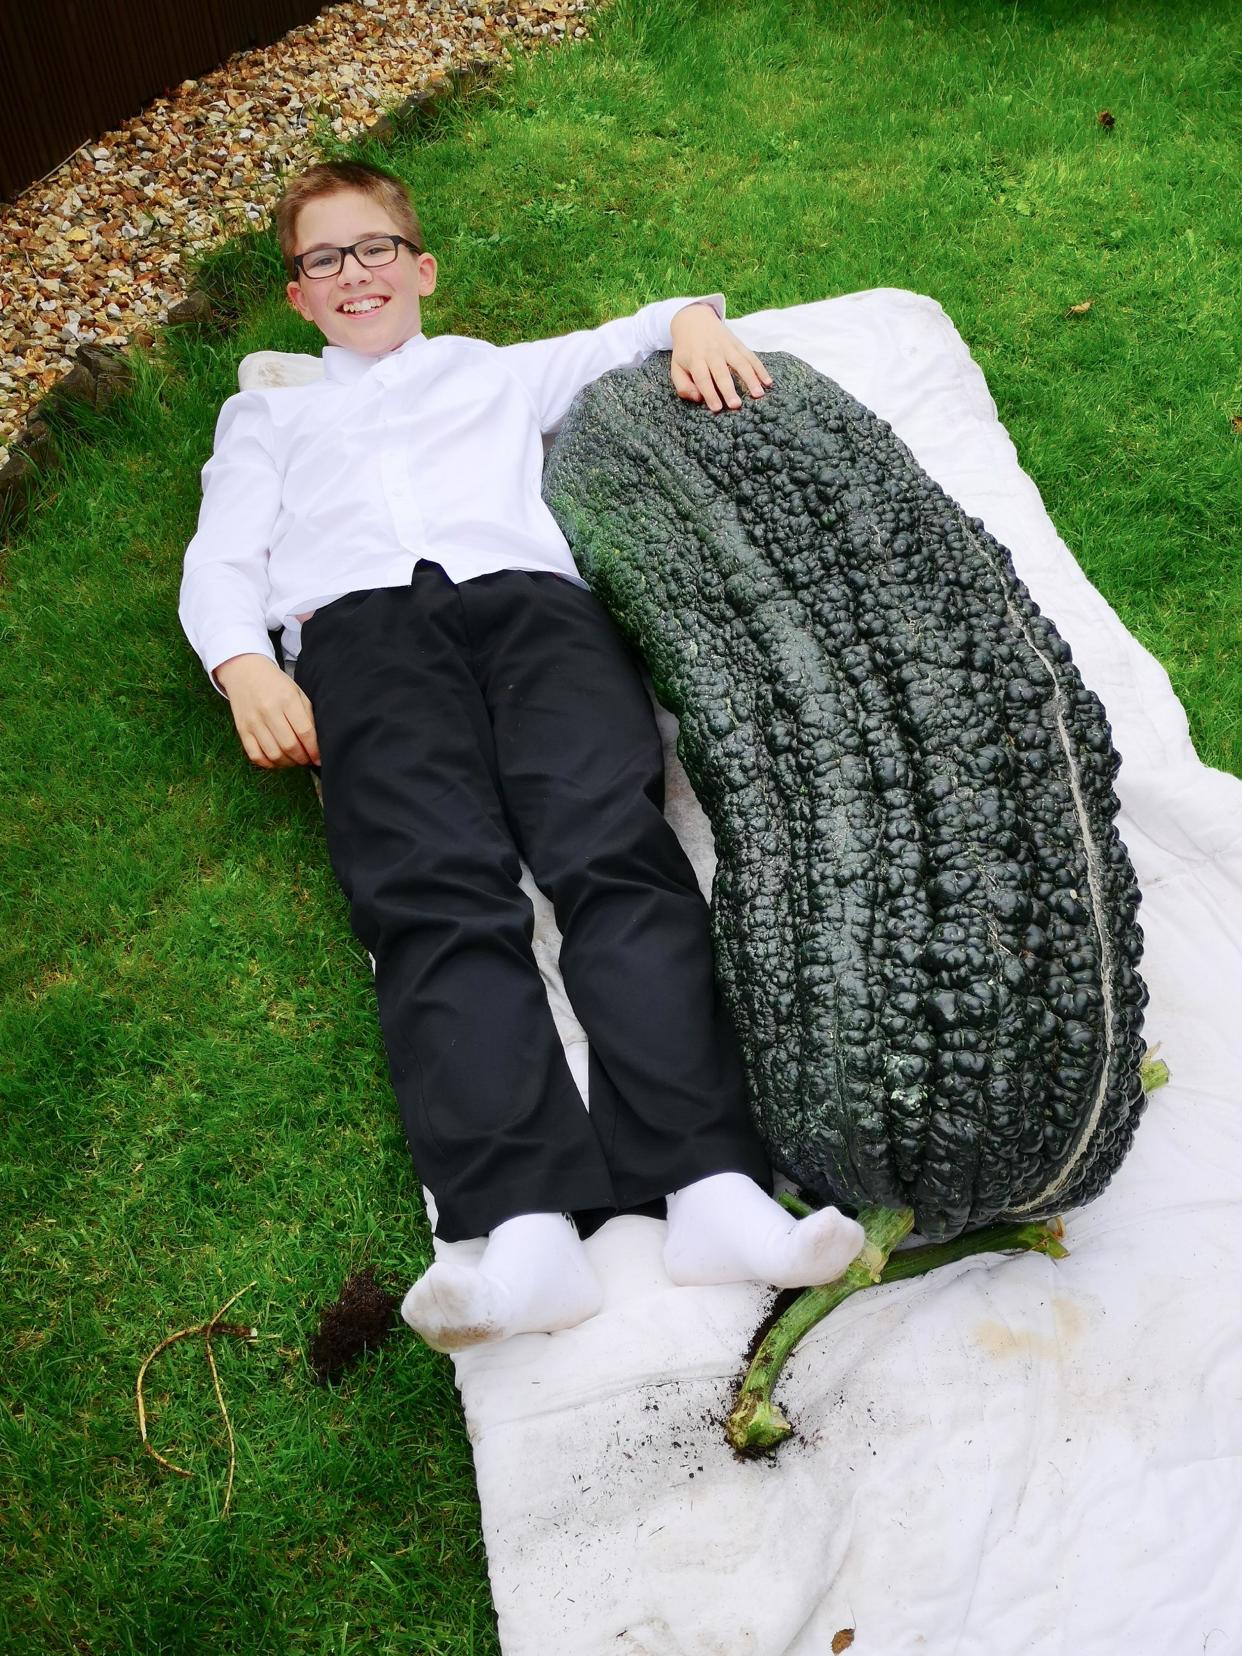 James Courtney-Fortey, aged 12, next to the gigantic marrow (Caters)